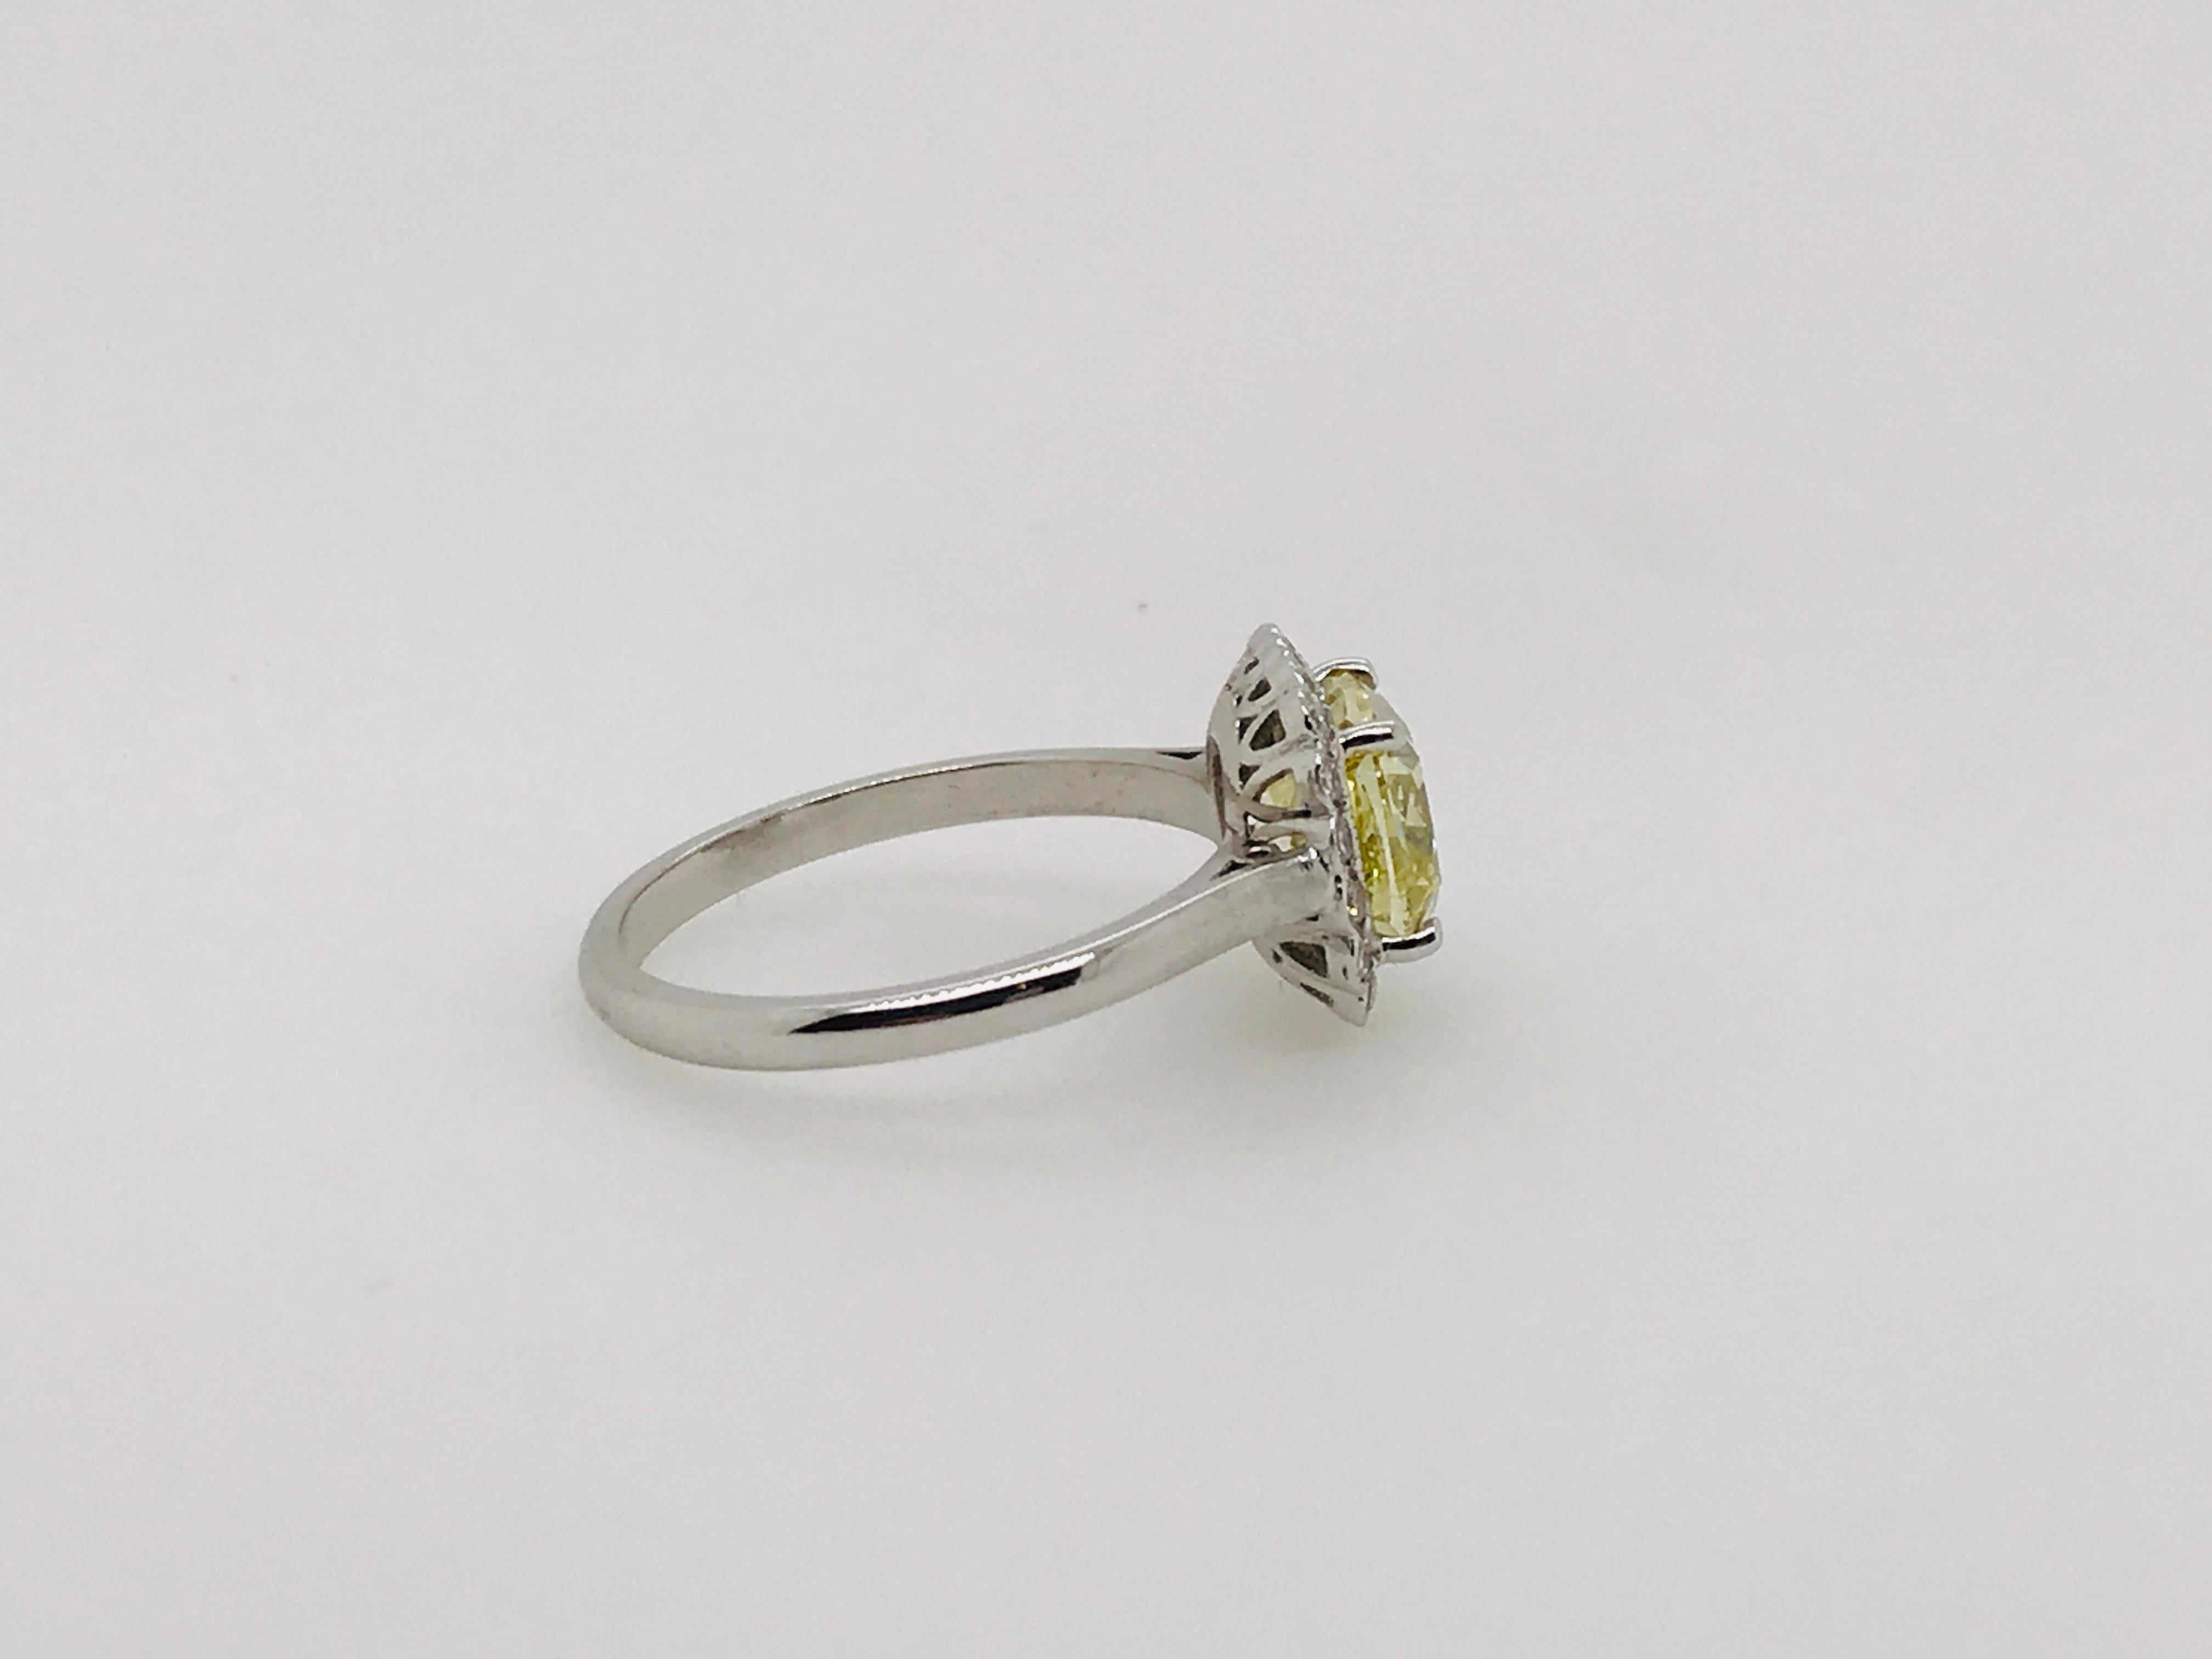 Modern Fancy Intense Yellow Cushion Cut Diamond in Diamond Scalloped Cluster Ring 18ct For Sale